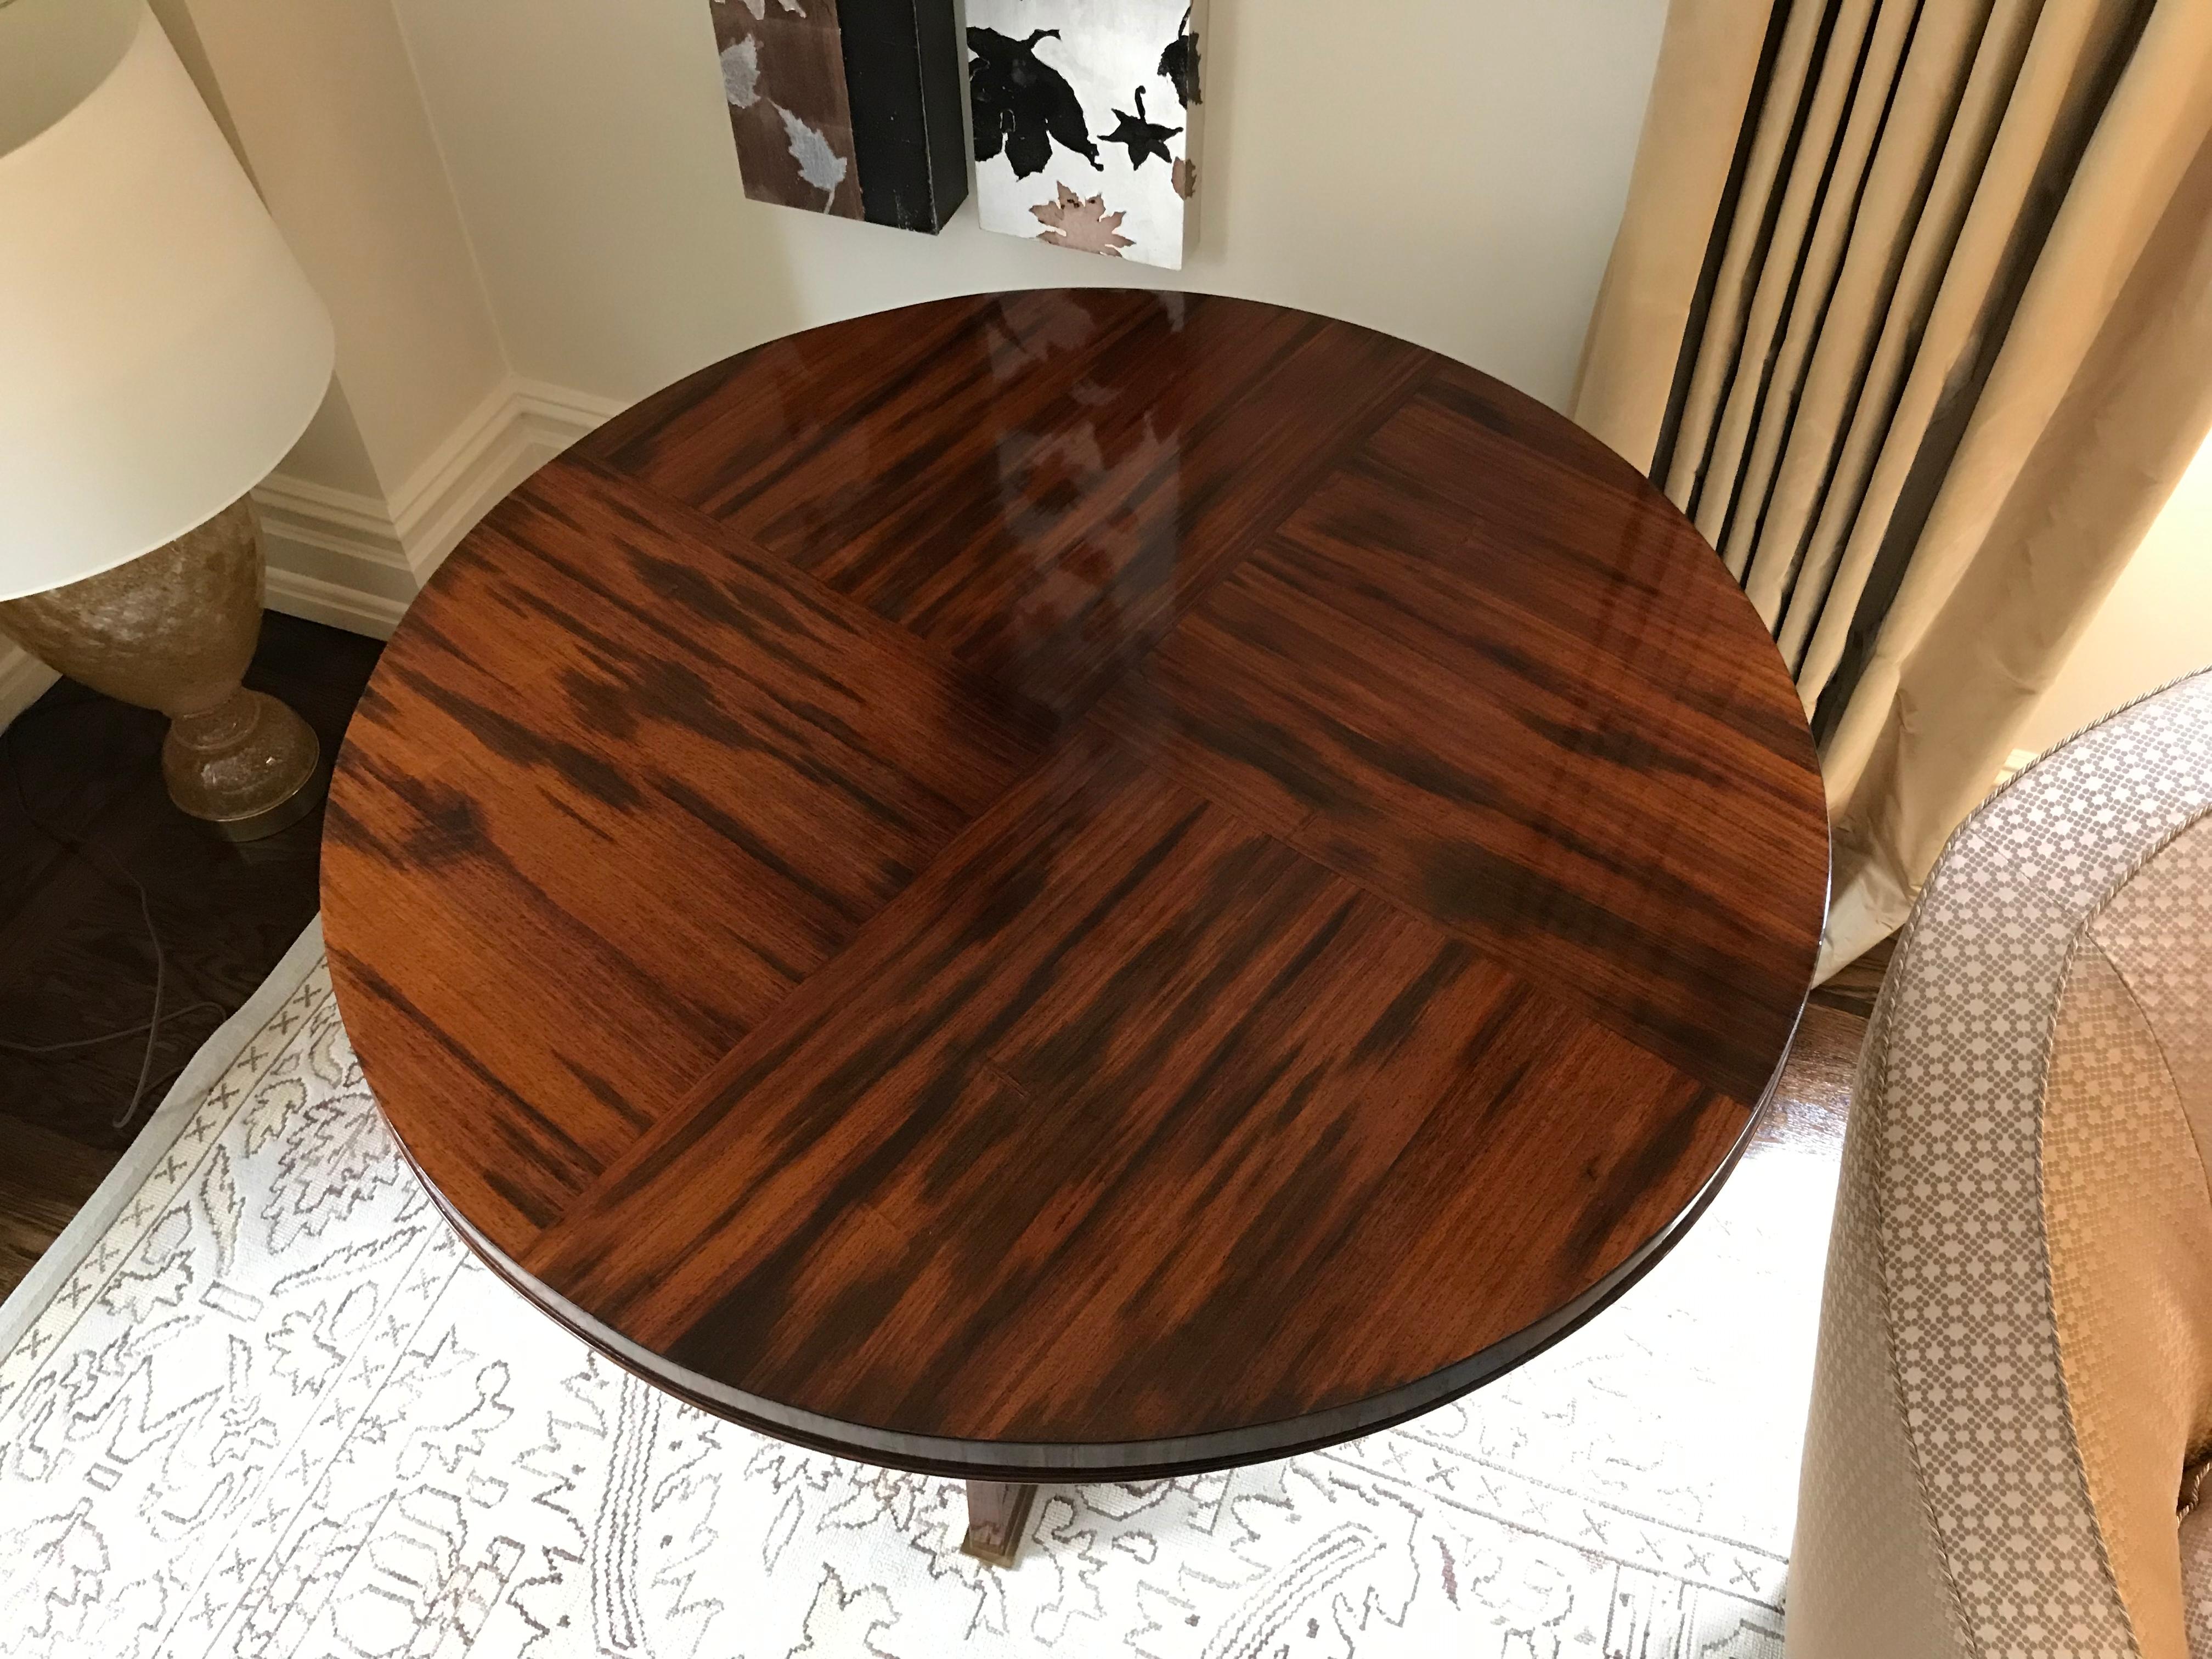 Round, quarter veneered rosewood table with a molding on the lower lip. Table is supported on a base composed of interesting tapered trestles with arched bottoms on bronze pads. Originally purchased from Bernd Goeckler with receipt.